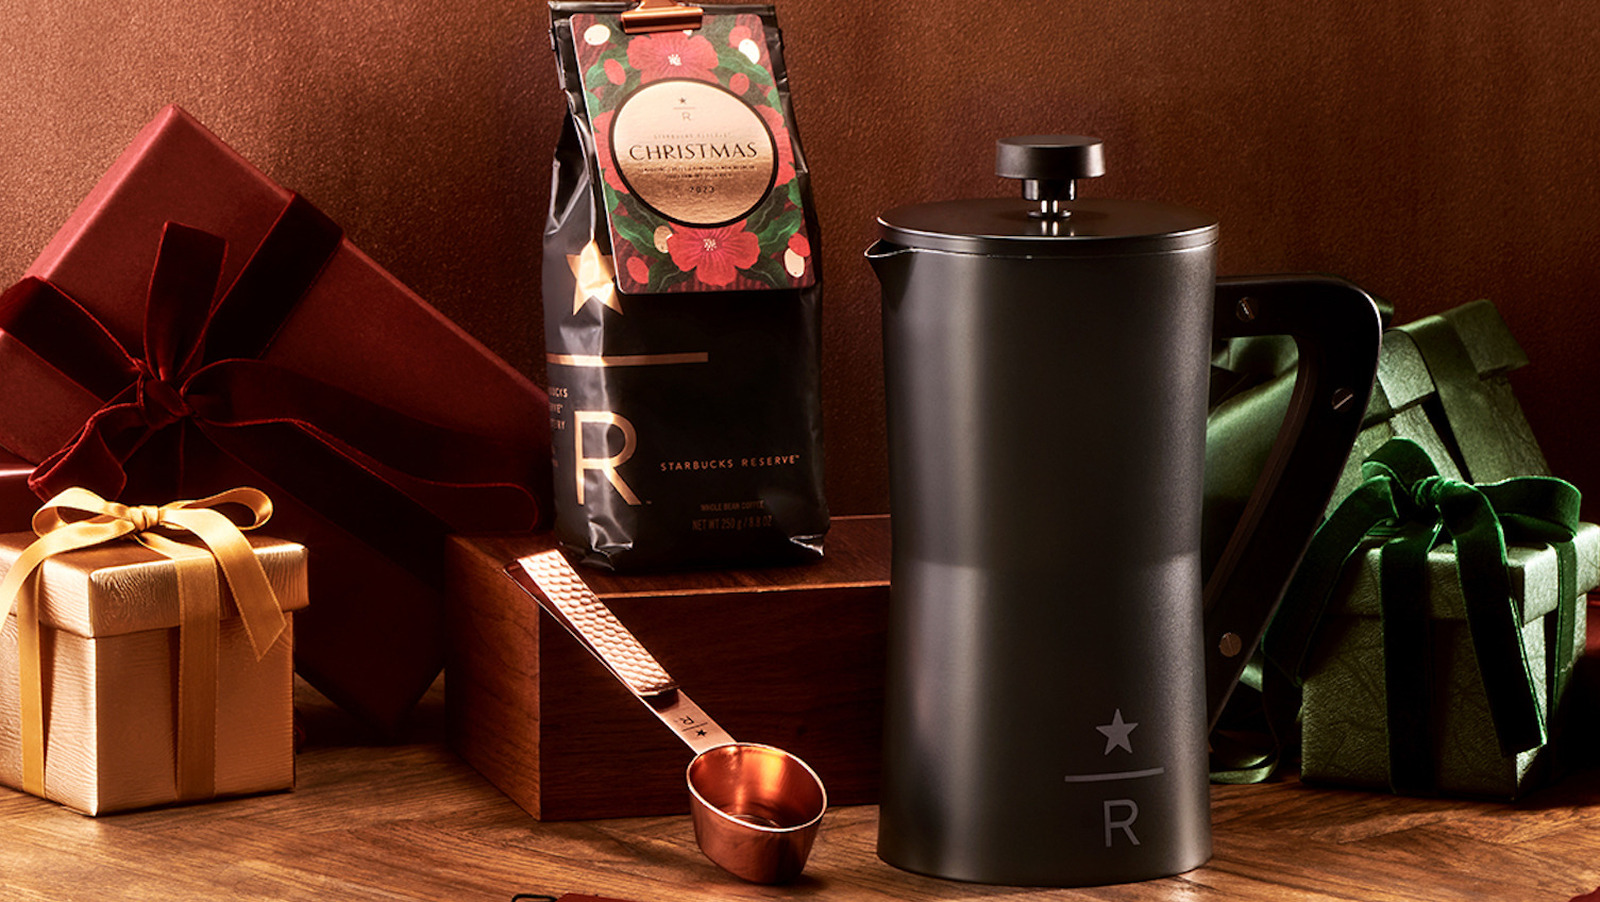 https://www.tastingtable.com/img/gallery/starbucks-reserve-stores-debut-festive-holiday-gift-sets-for-all-coffee-lovers/l-intro-1697647115.jpg